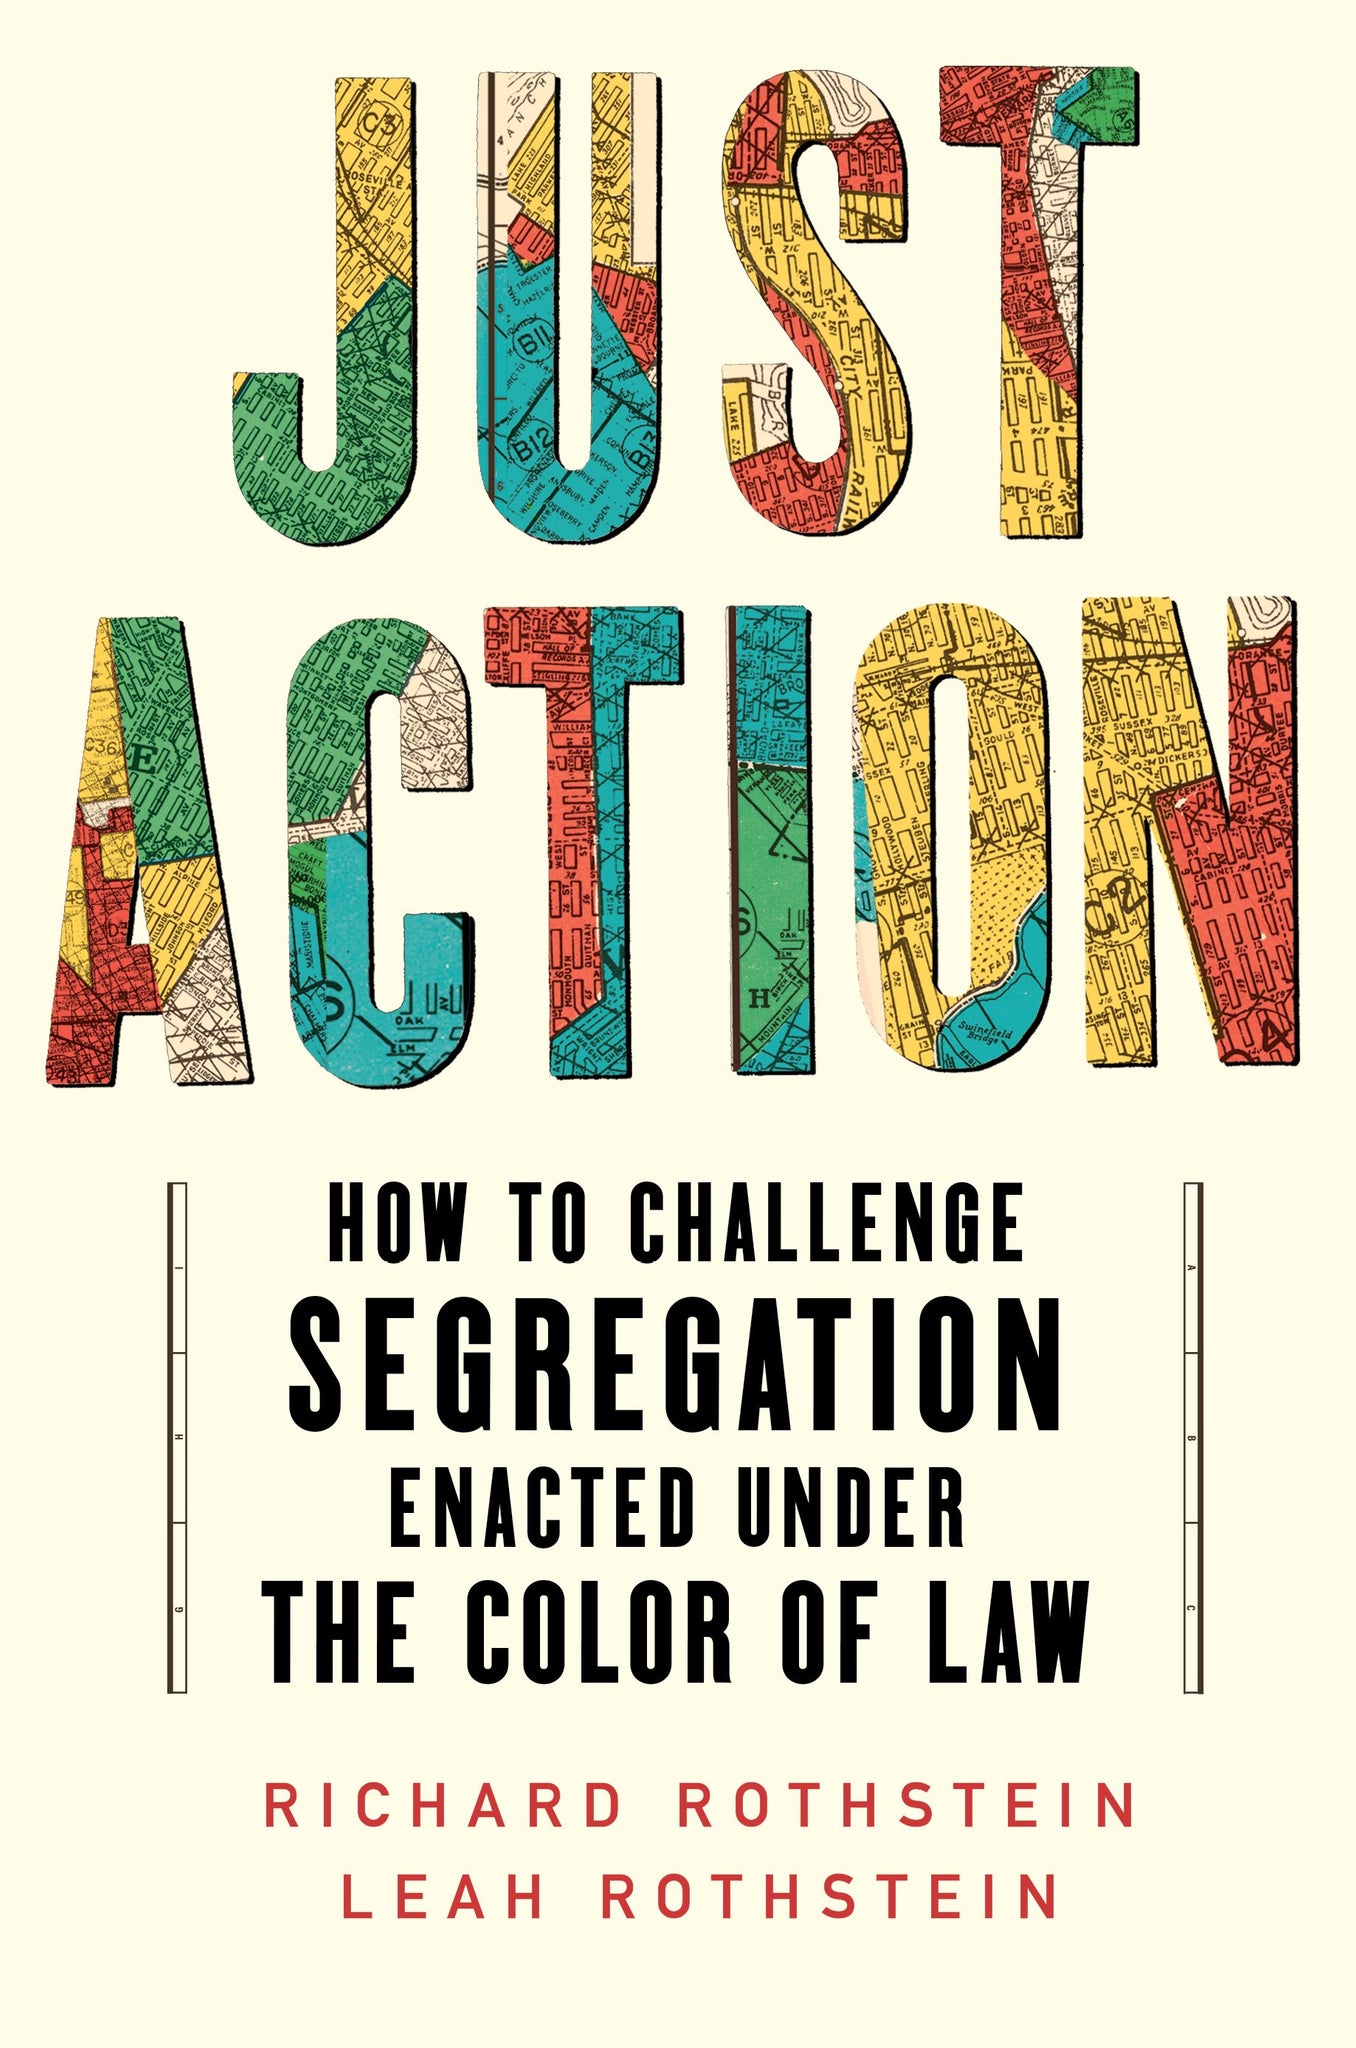 Just Action: How to Challenge Segregation Enacted Under the Color of Law (Hardcover)